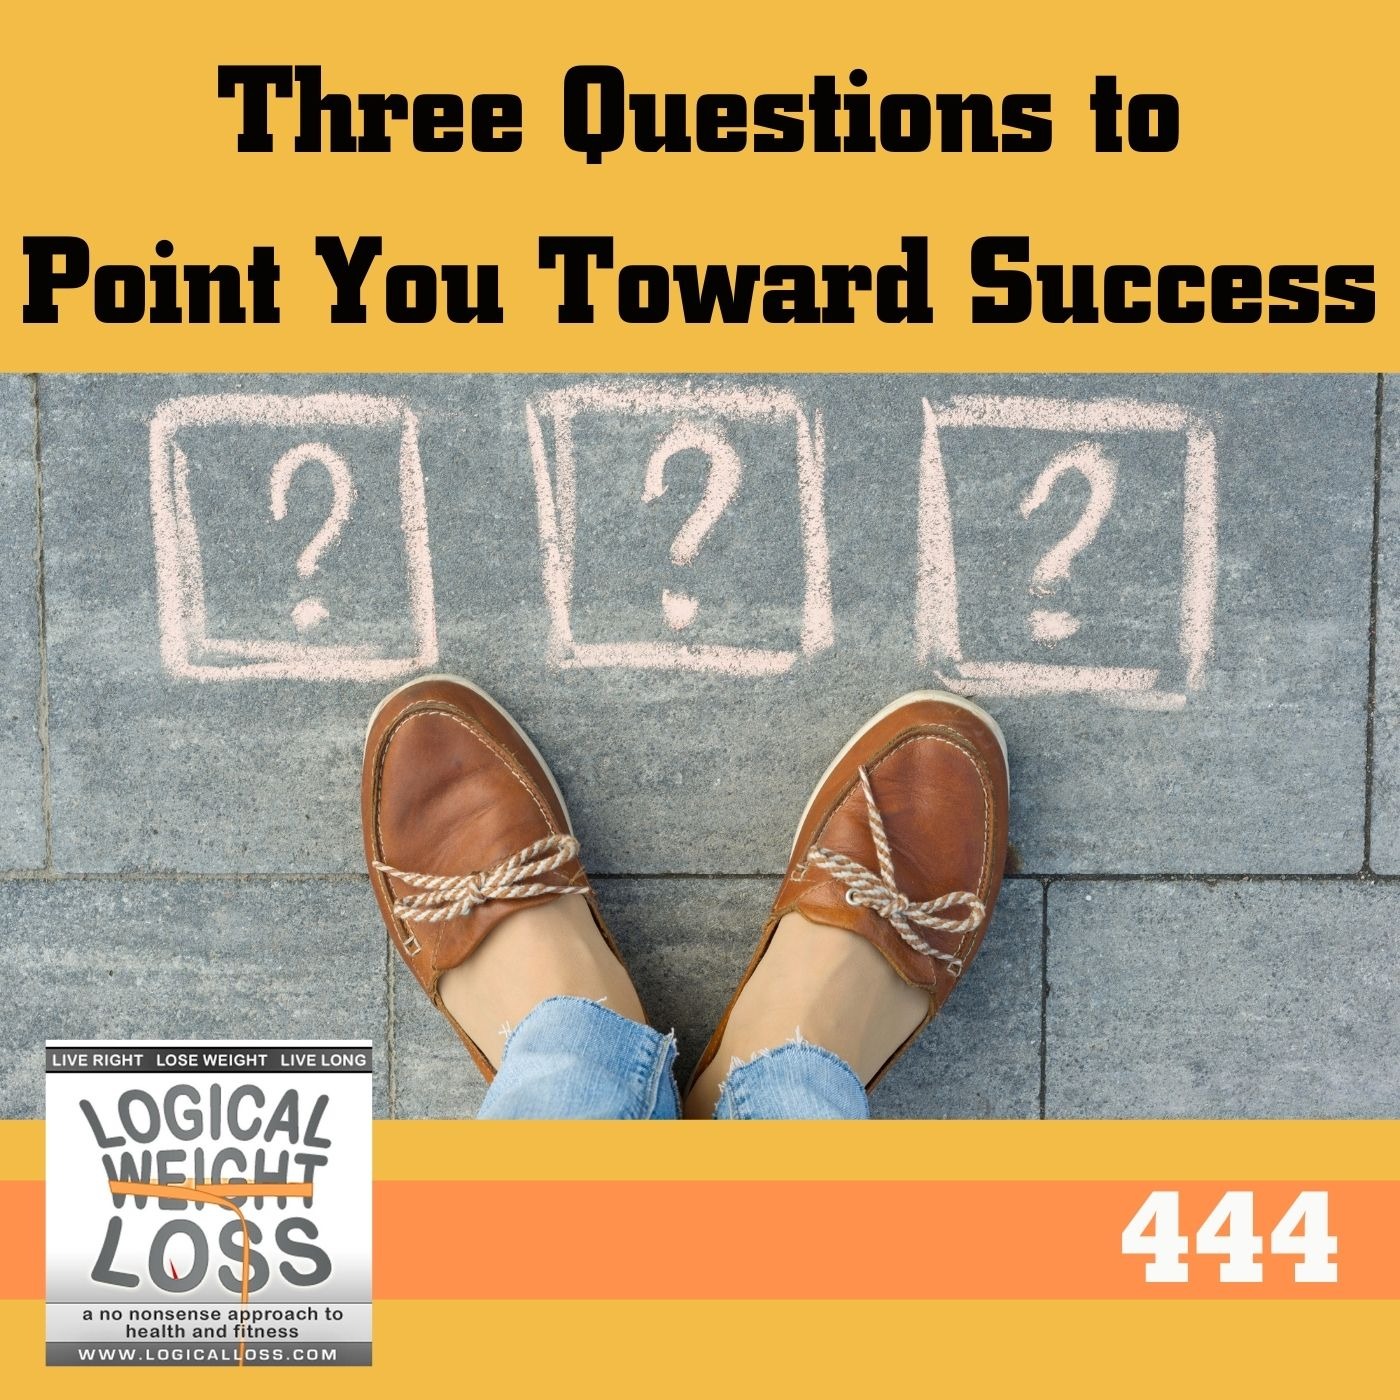 Three Questions to Point You Toward Success Image